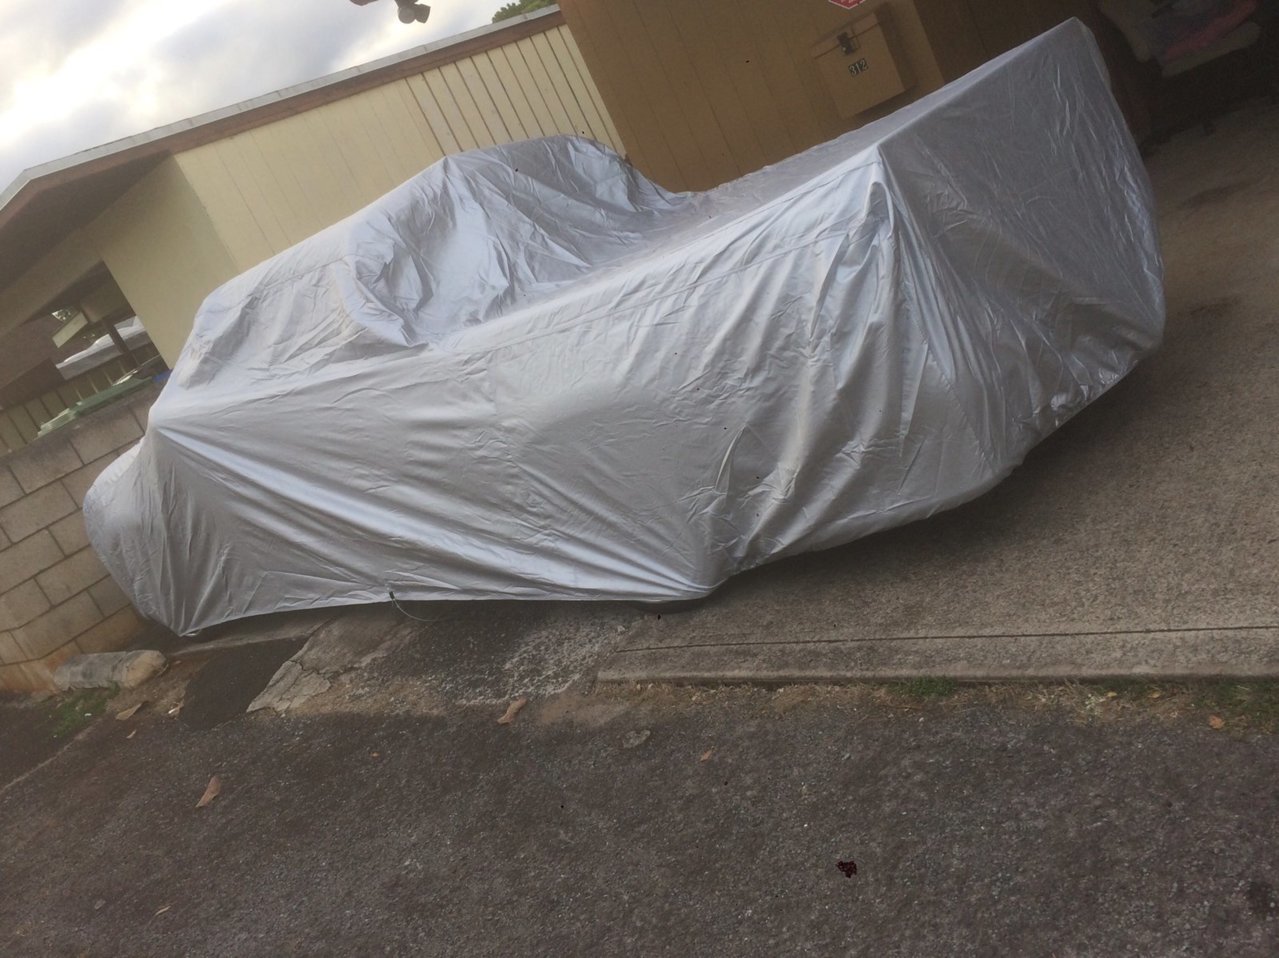 I know car covers are not a big hit, but does anyone use one or